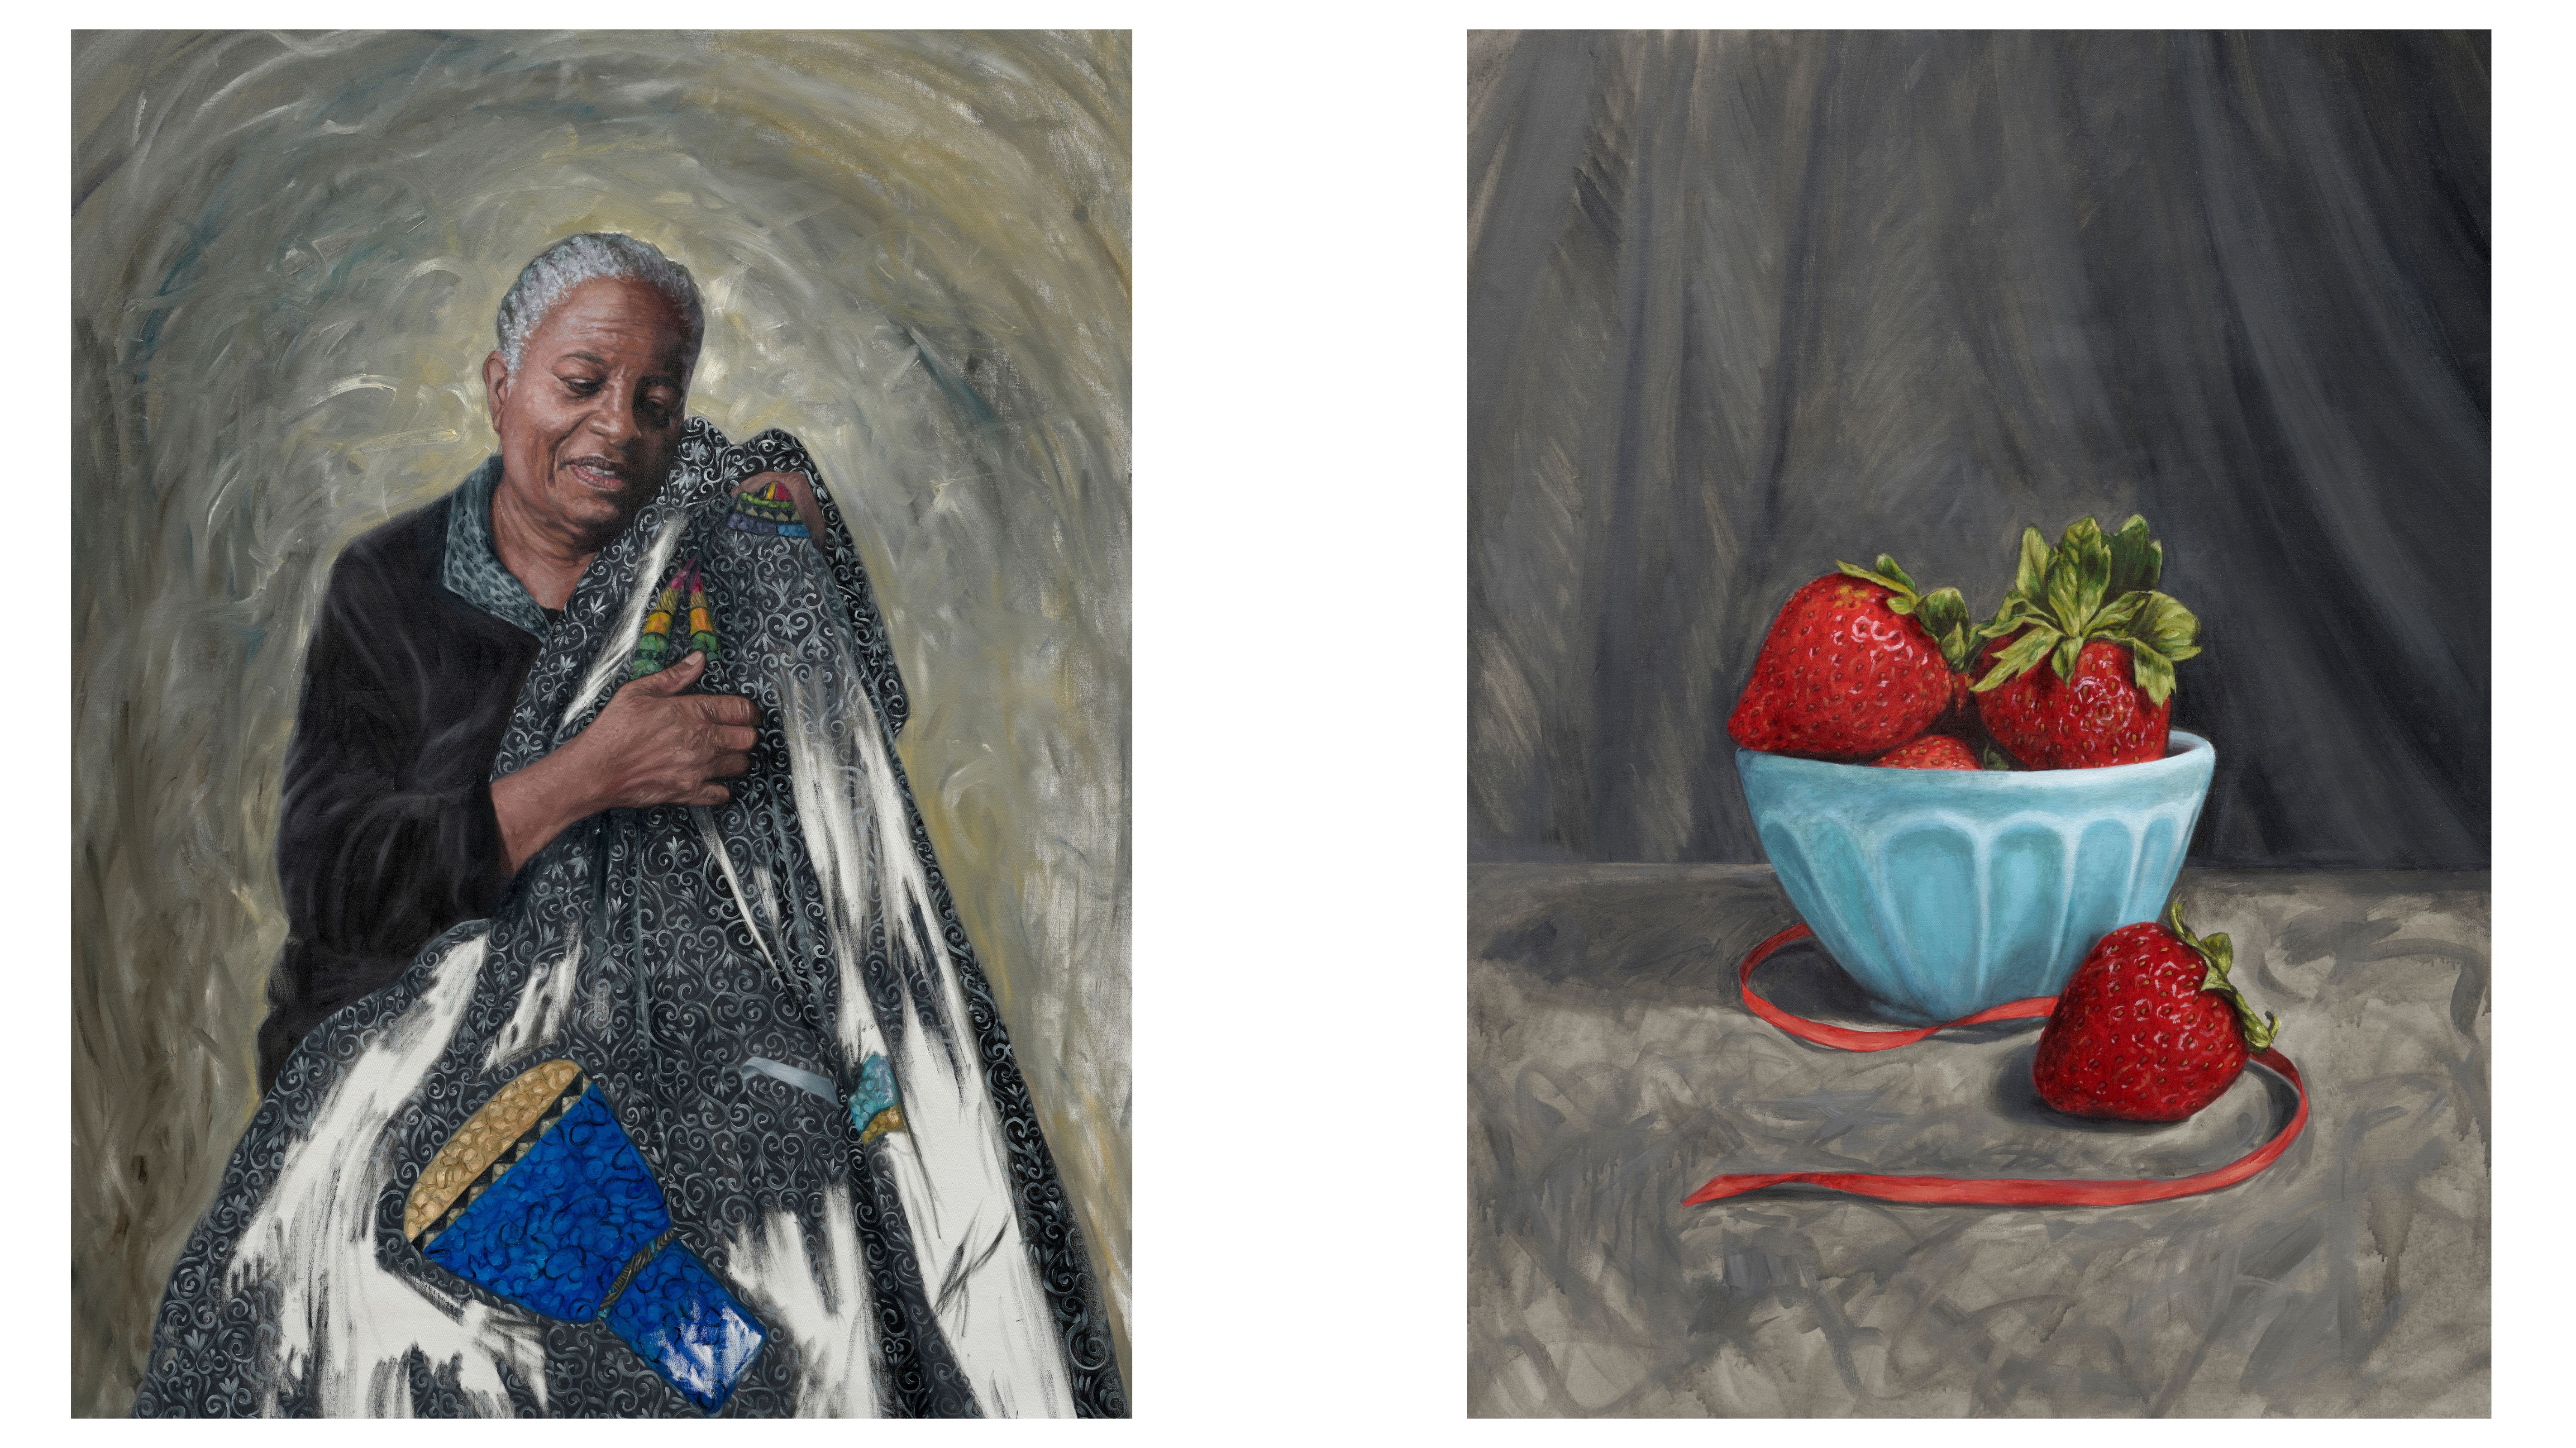 Two oil paintings side by side, the one on the left of a middle aged black woman with grey hair embracing a quilt around her and the one on the right a still life of a blue bowl filled with strawberries and a red bow place next to the bowl